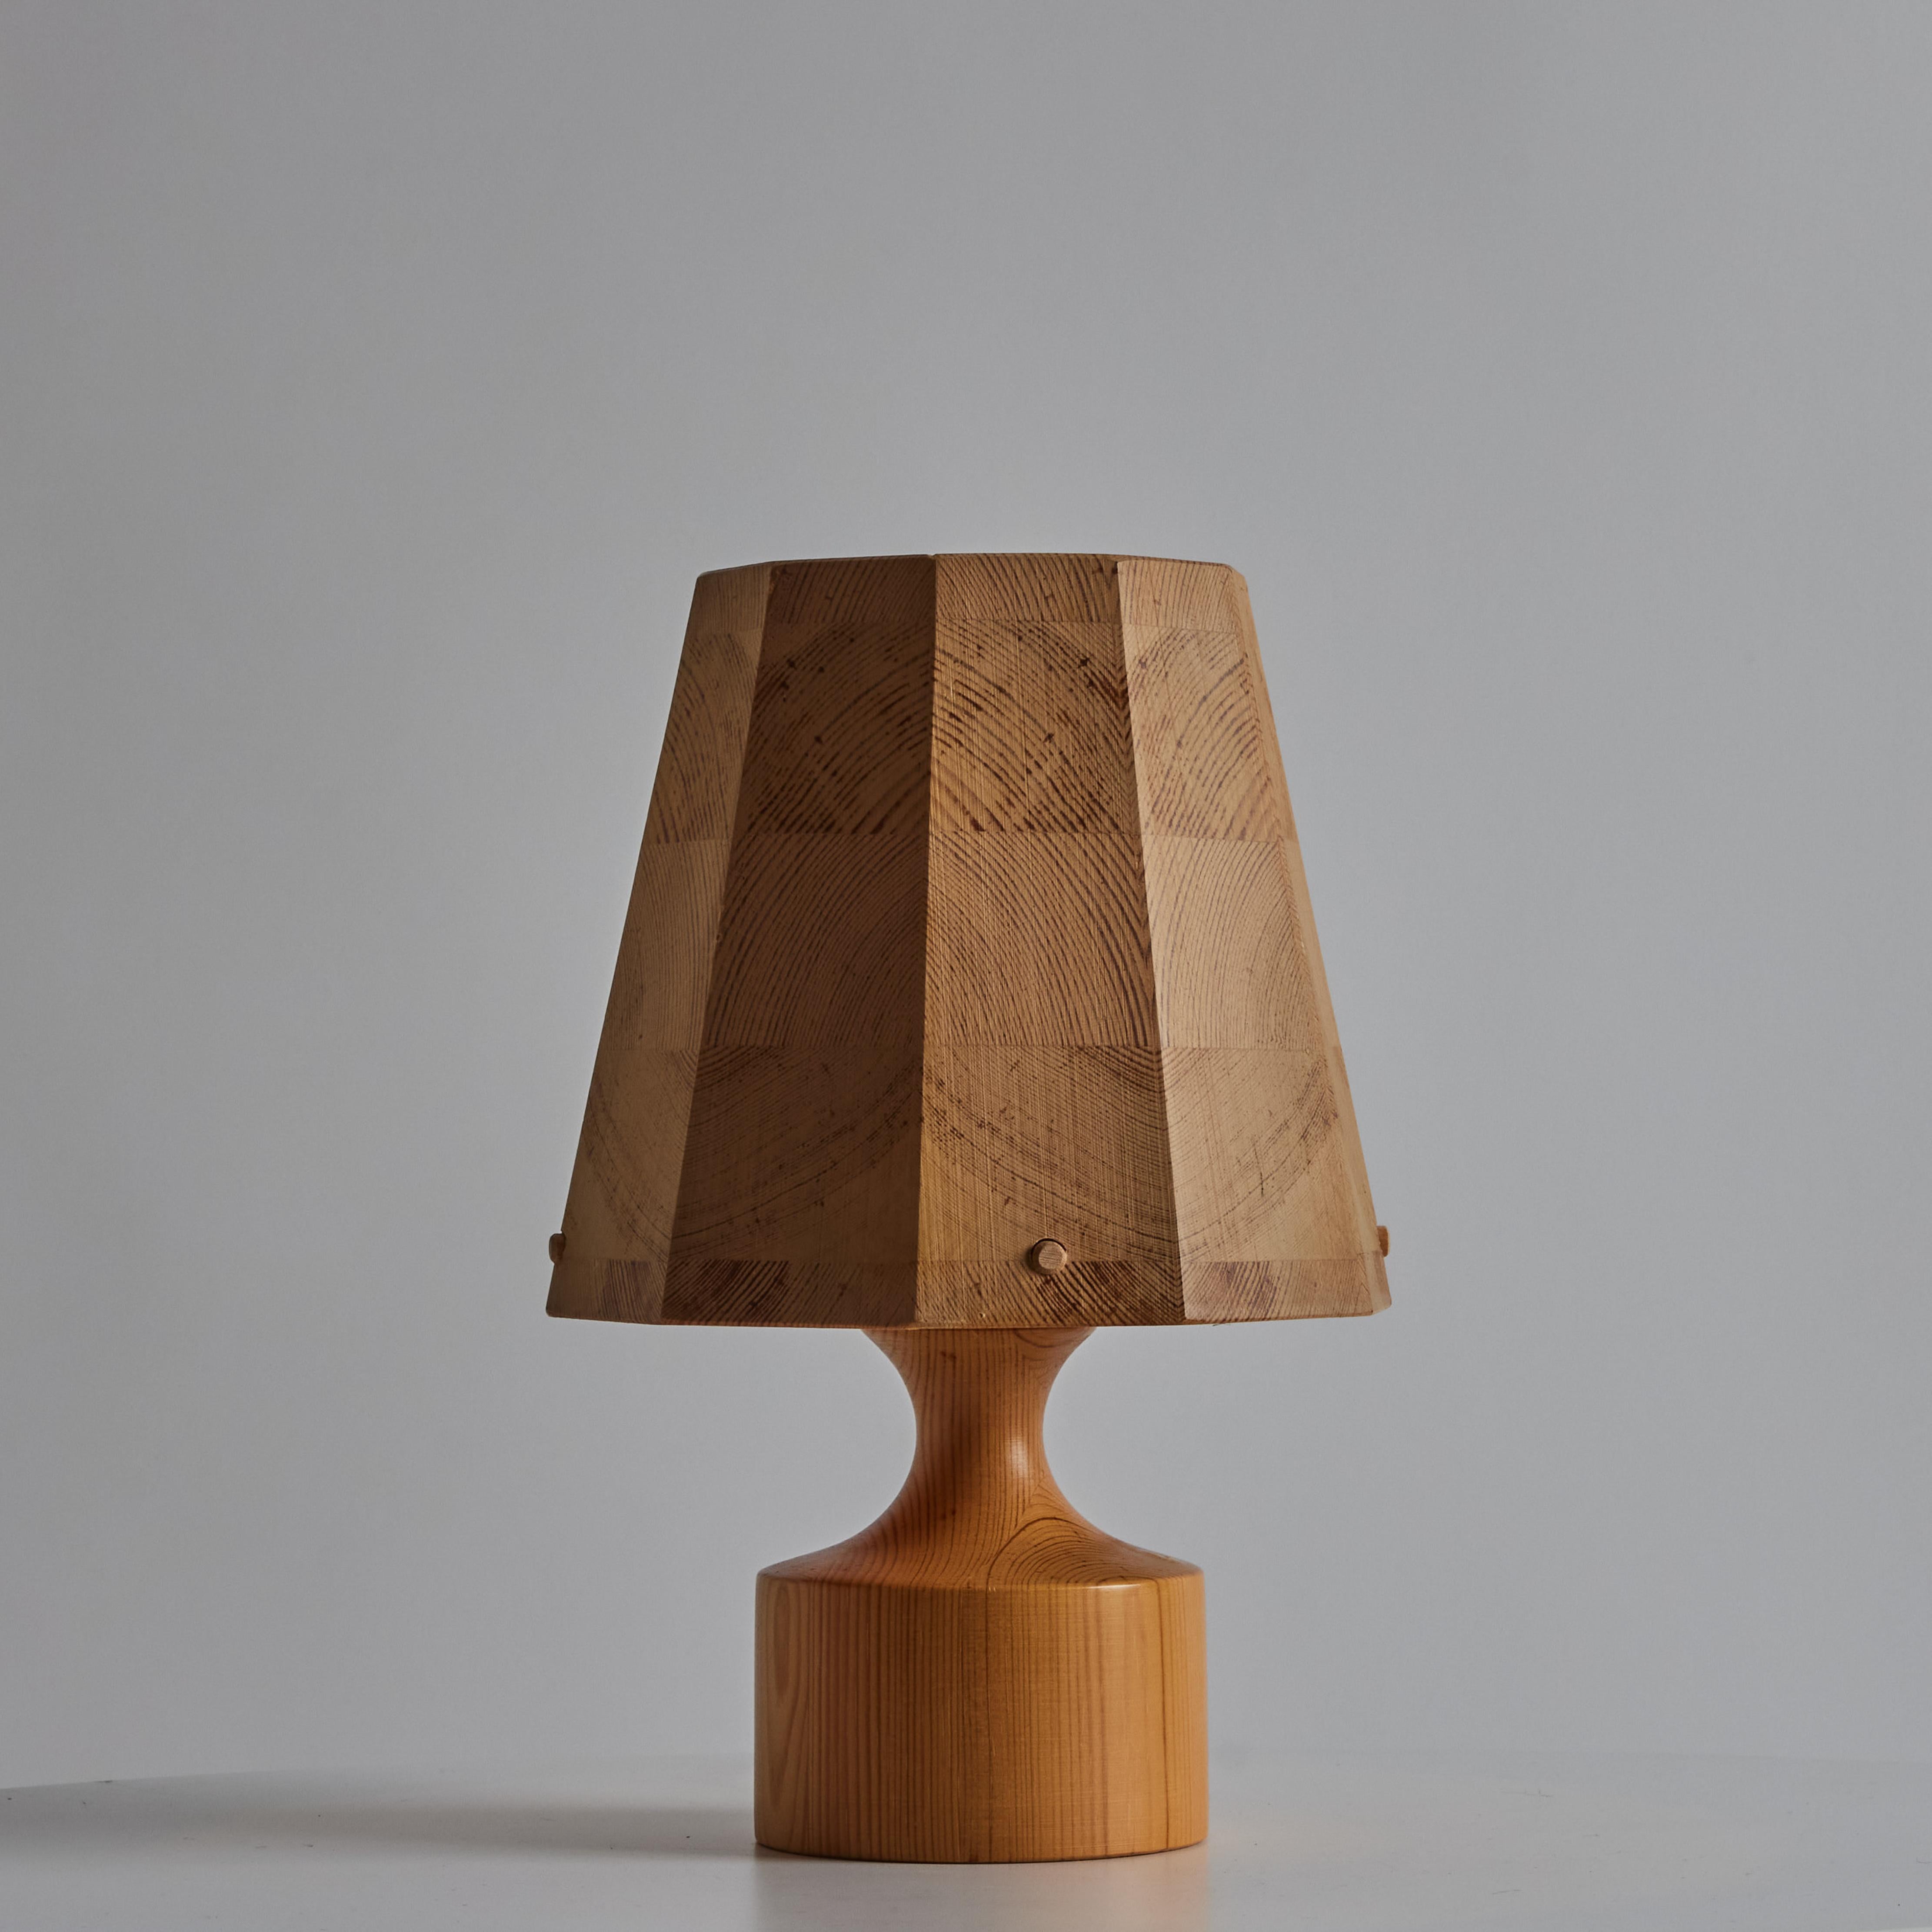 Pair of 1960s Wood Table Lamps Attributed to Hans-Agne Jakobsson for AB Ellysett In Good Condition For Sale In Glendale, CA